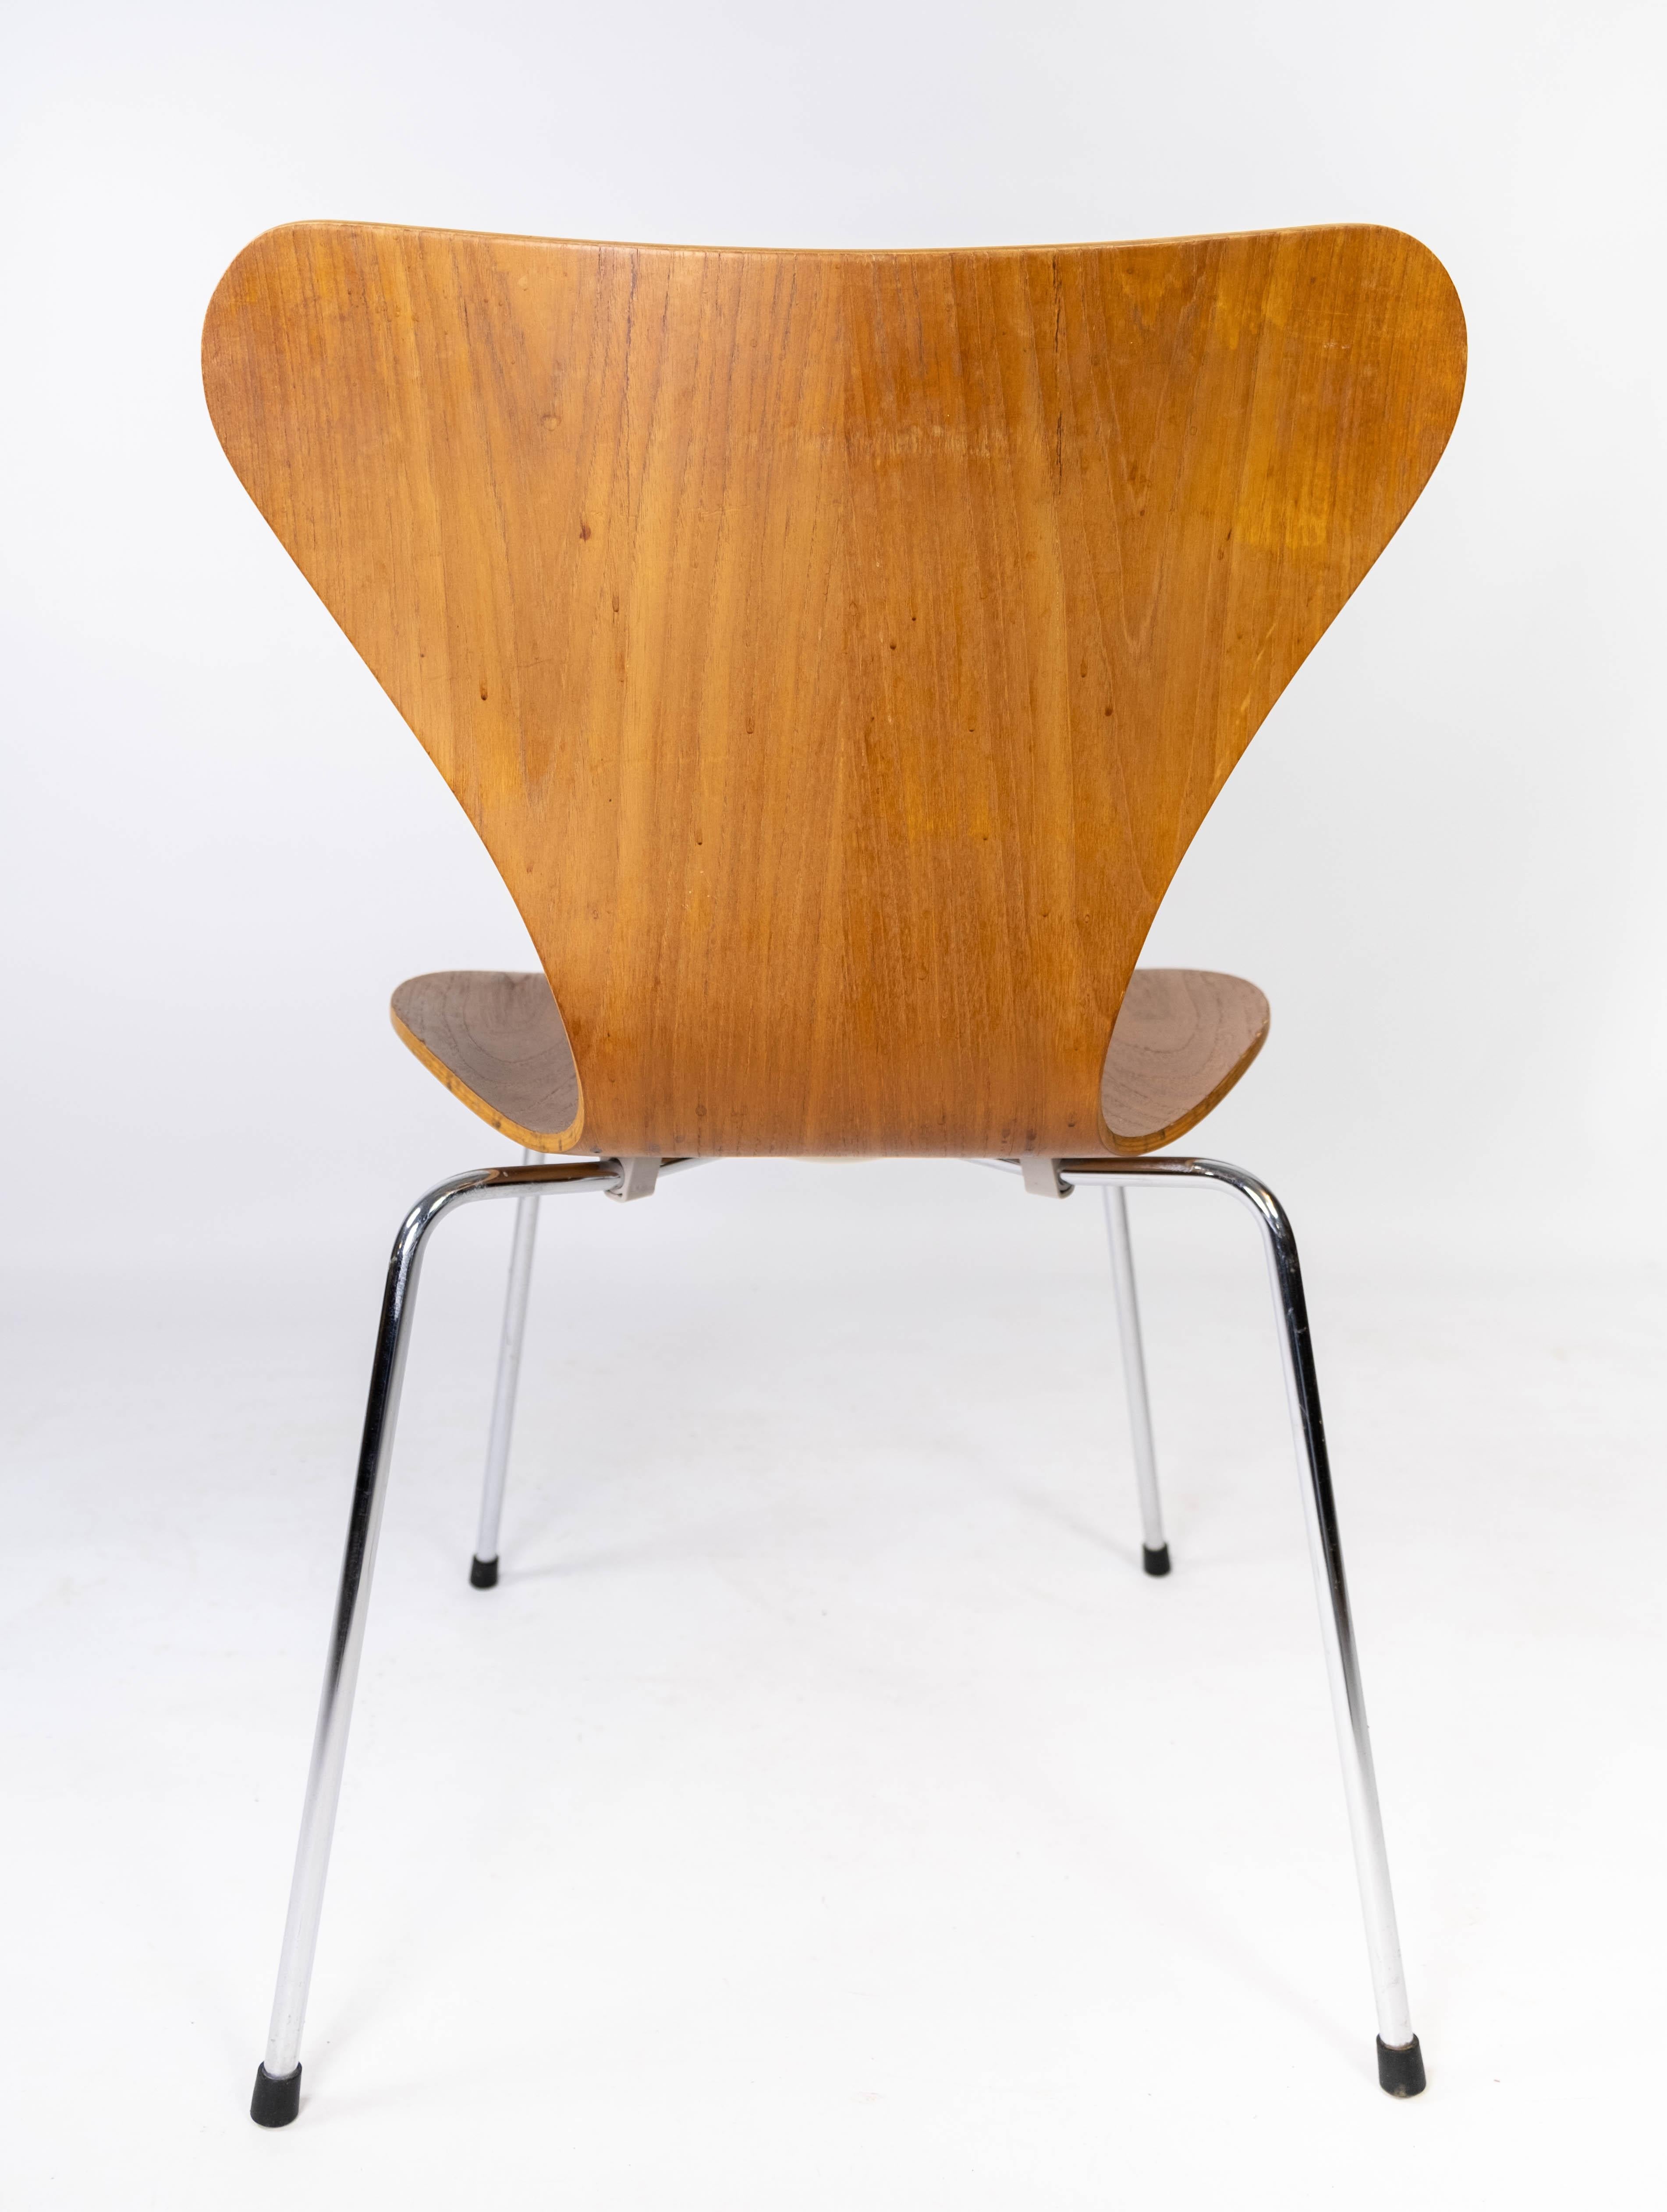 Mid-20th Century Set of 12 Series Seven Chairs, Model 3107, of Teak Designed by Arne Jacobsen